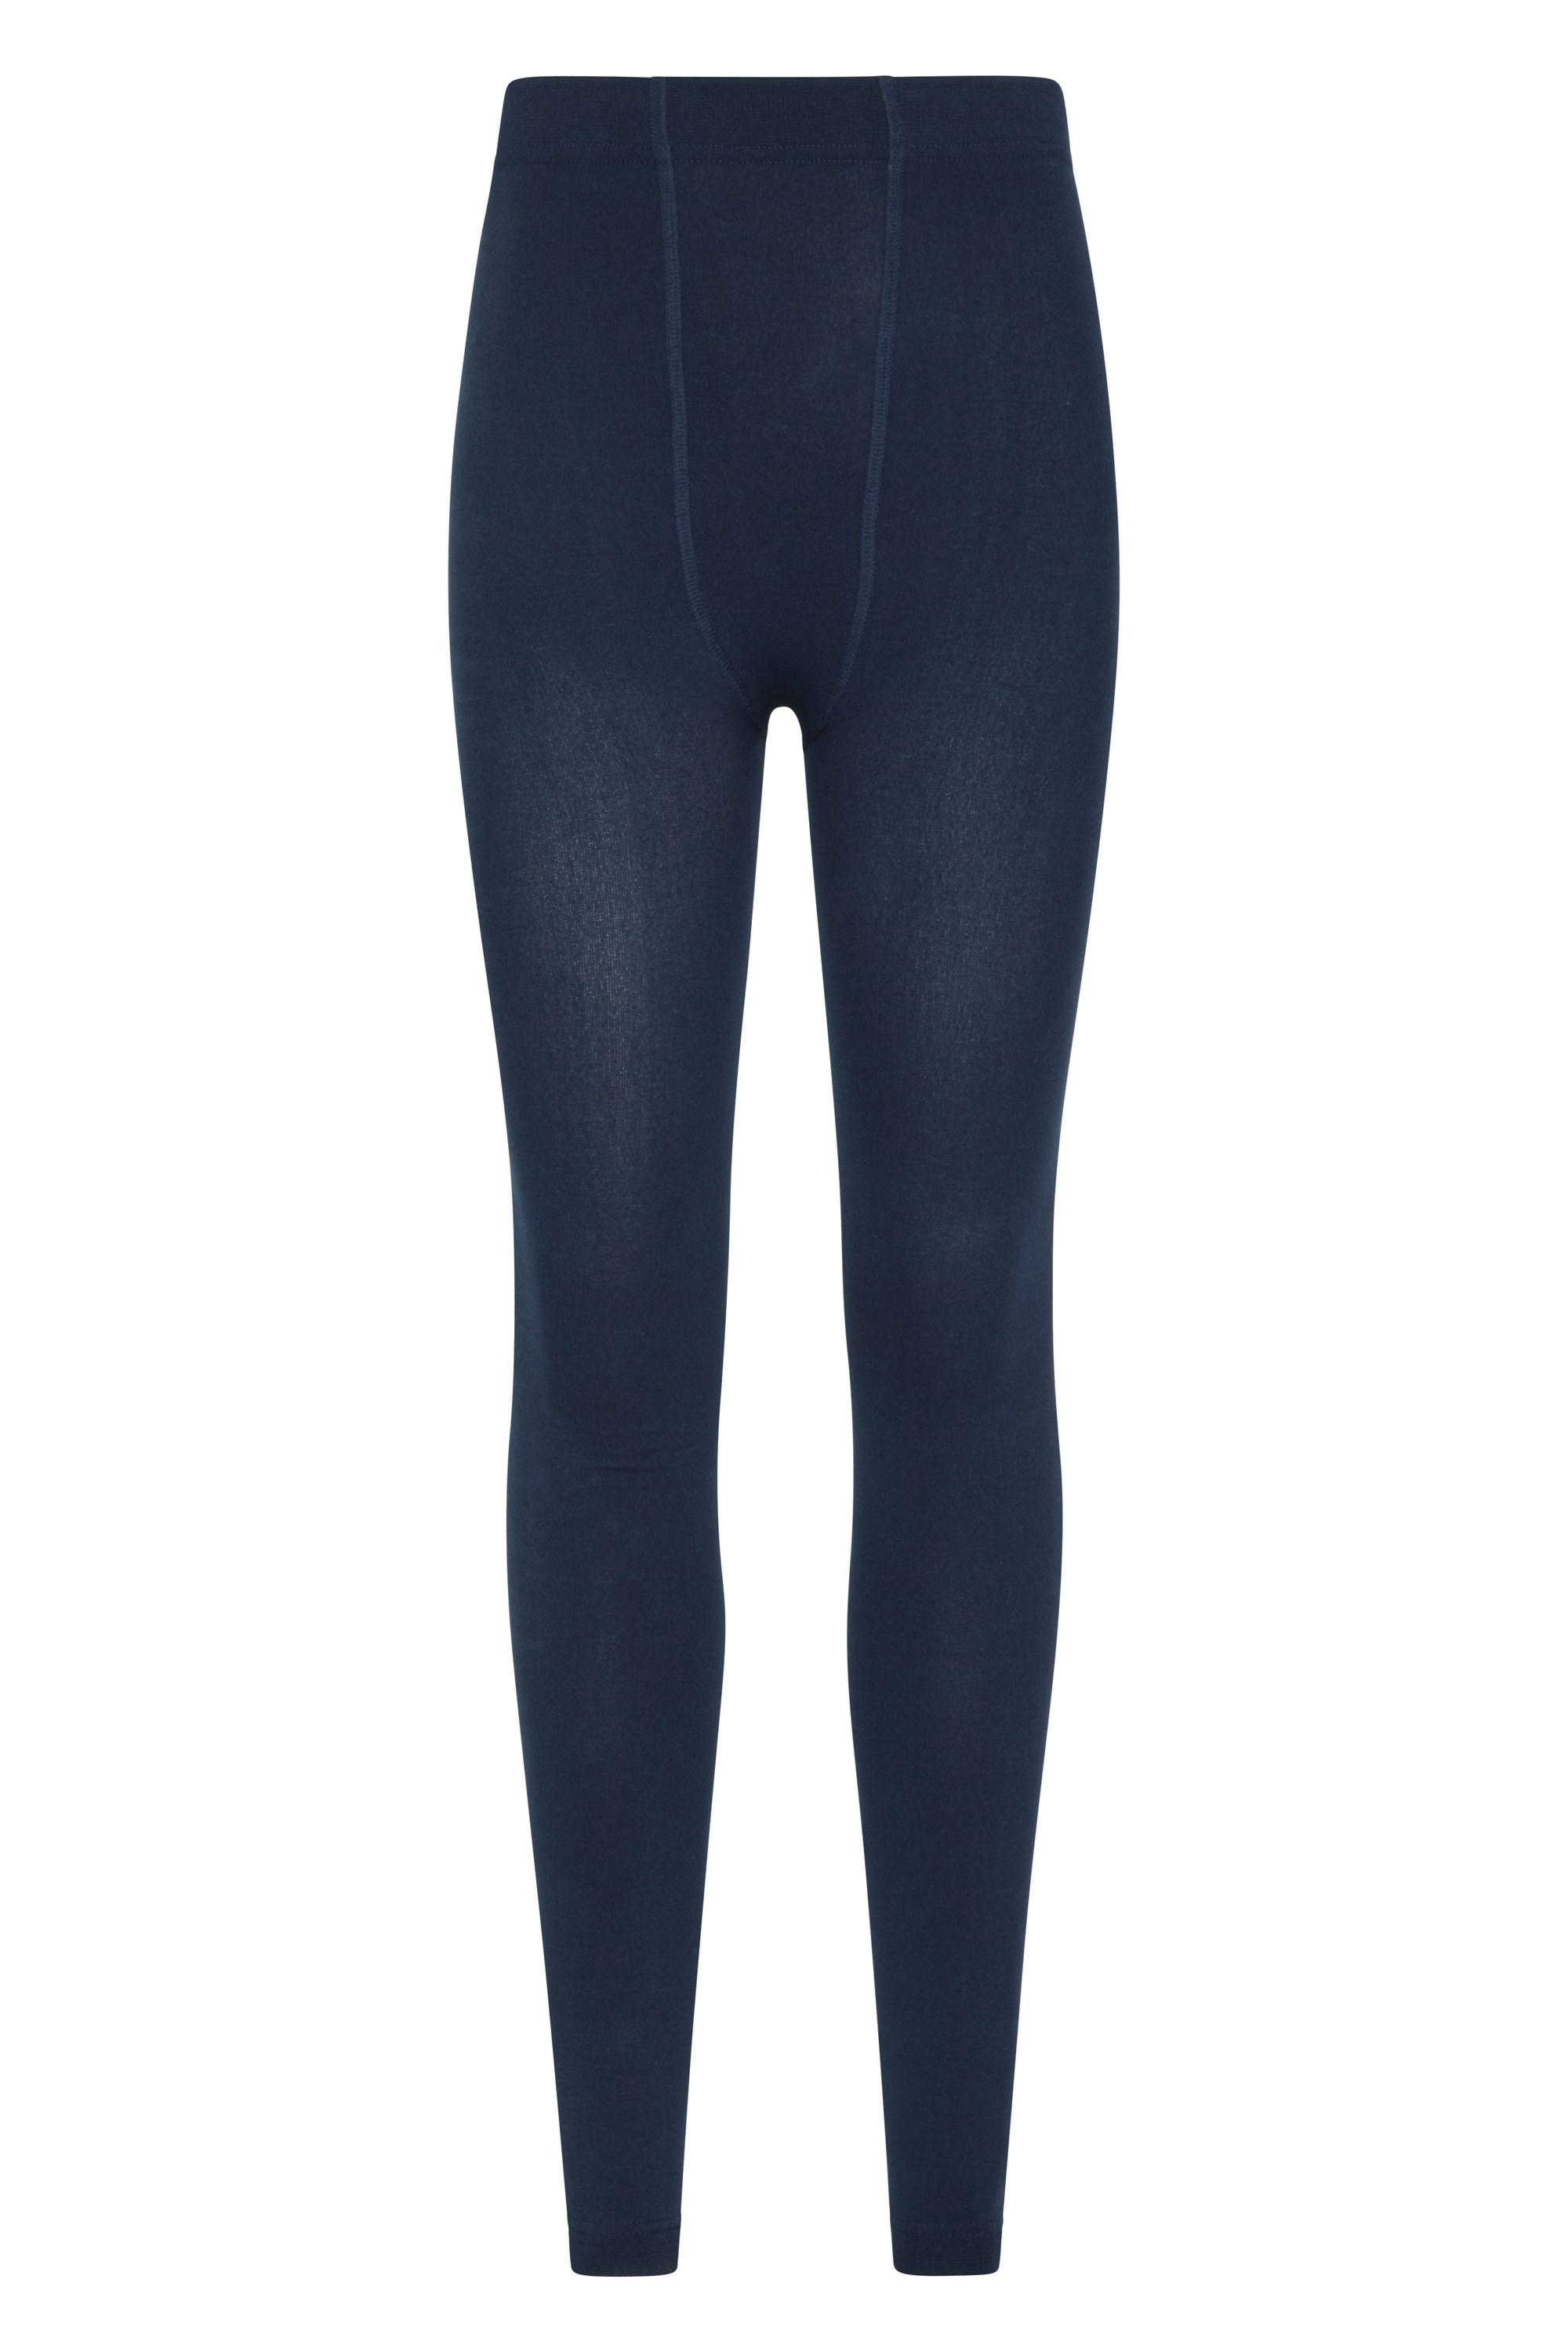 Isotherm Womens Brushed Thermal Leggings - Navy